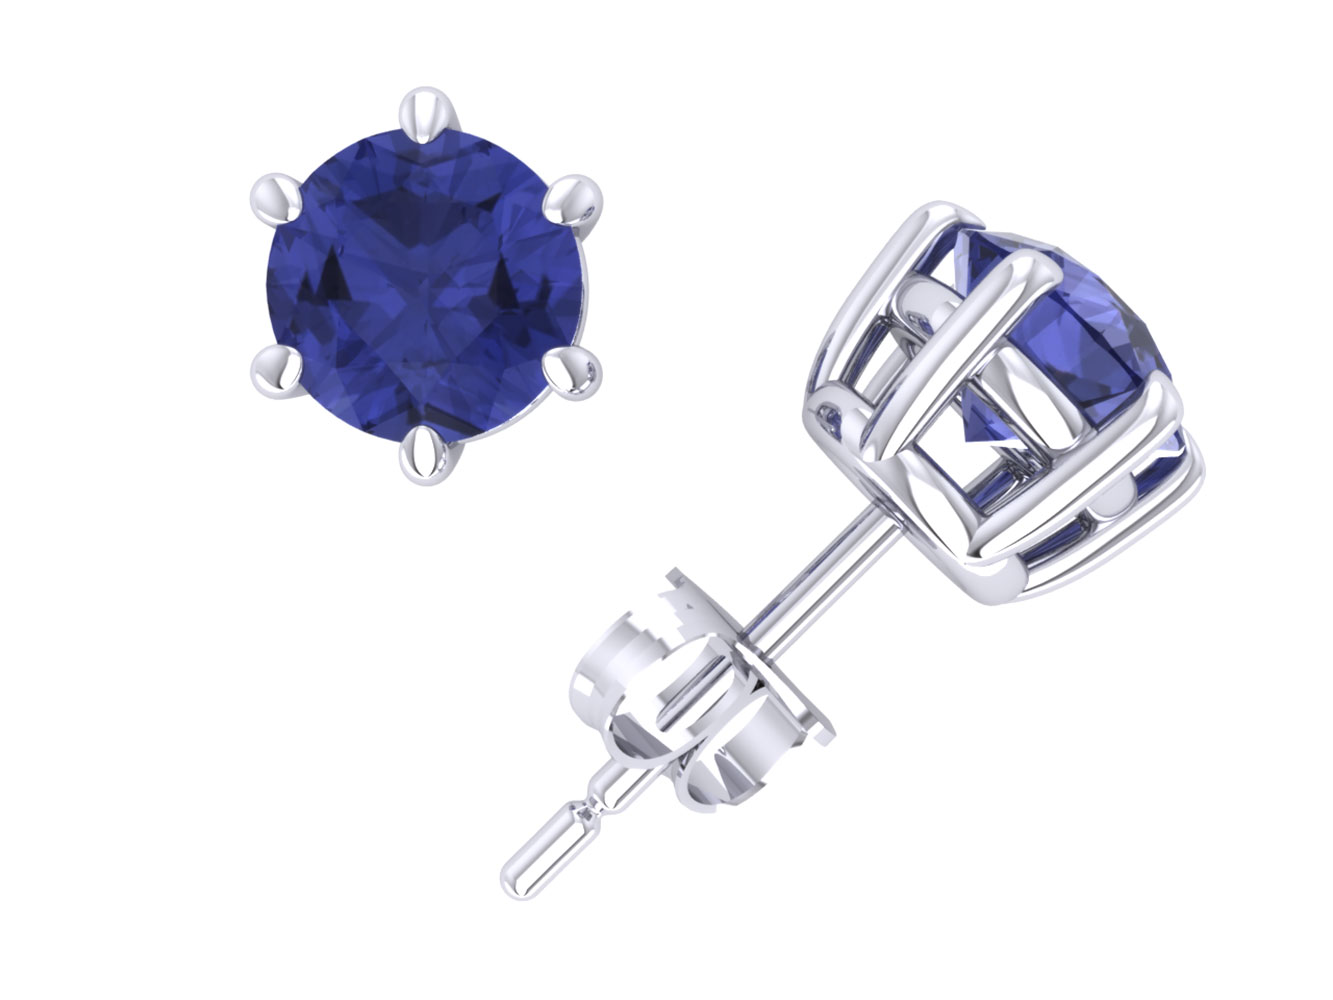 Jewel We Sell Real 1.50Ct Round Cut Tanzanite Basket Stud Earrings 14k White or Yellow Gold Prong Push Back AA Quality